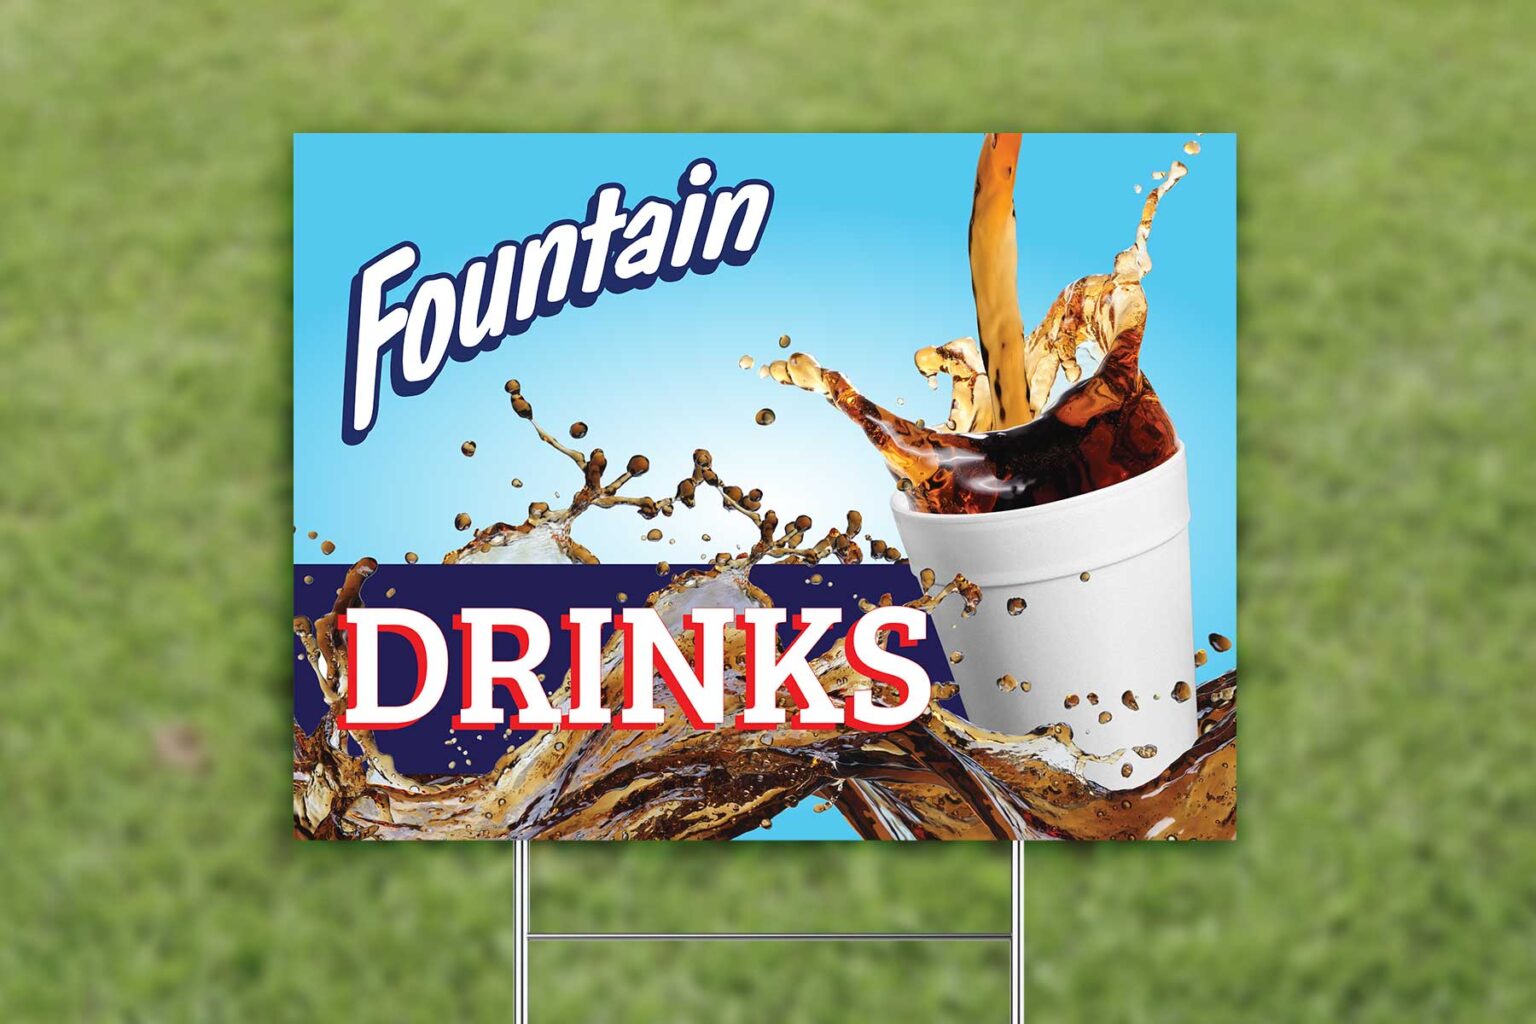 Yard Sign for Grass with Fountain Drinks Graphic